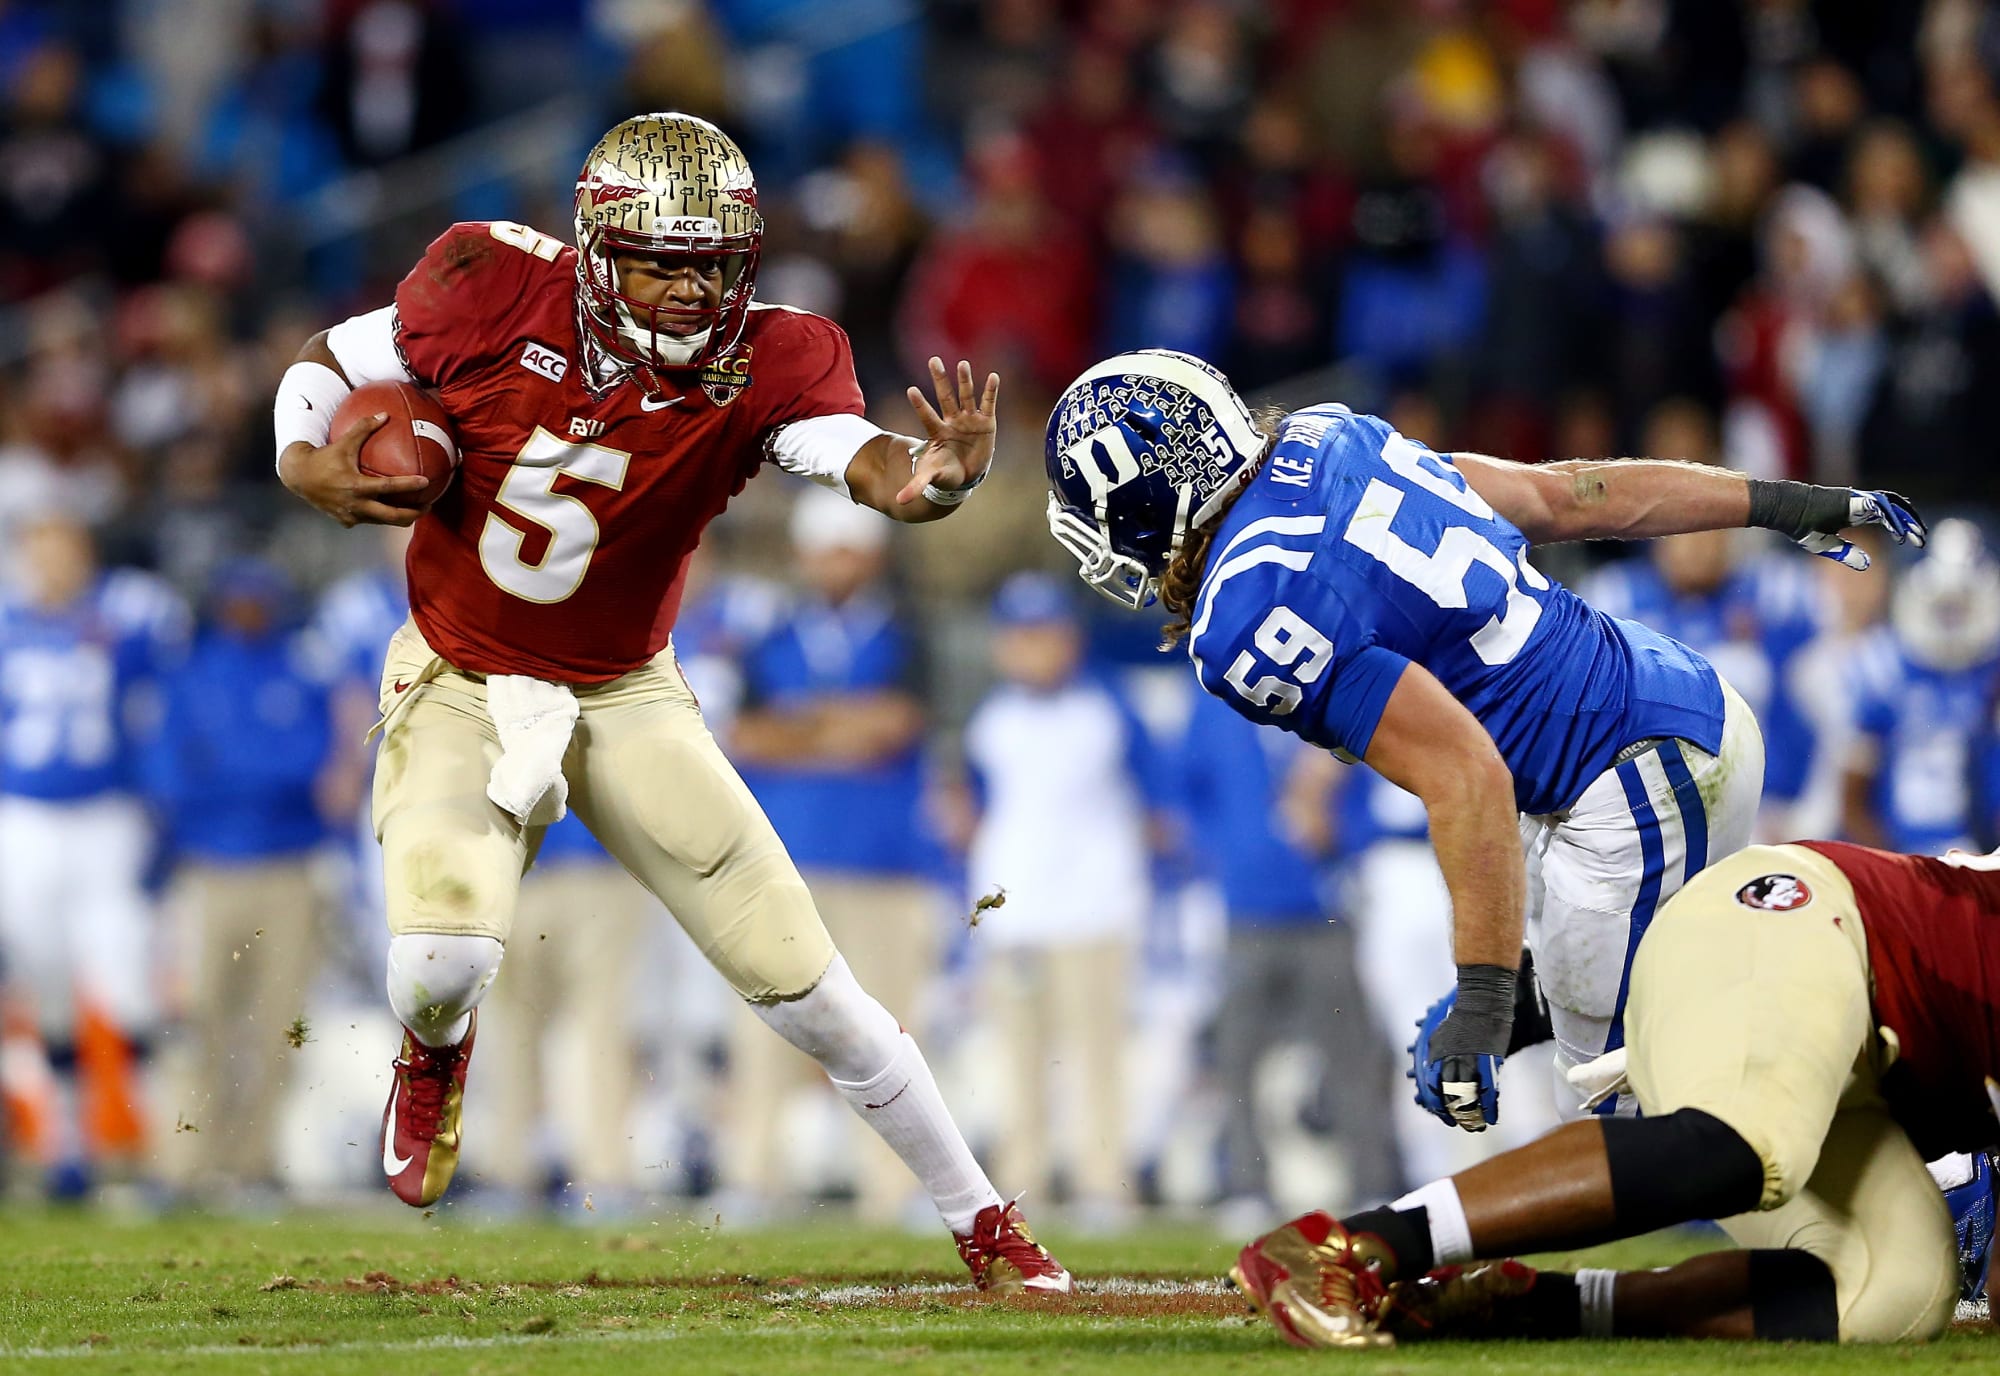 FSU Football facing must win game against Duke is mind boggling